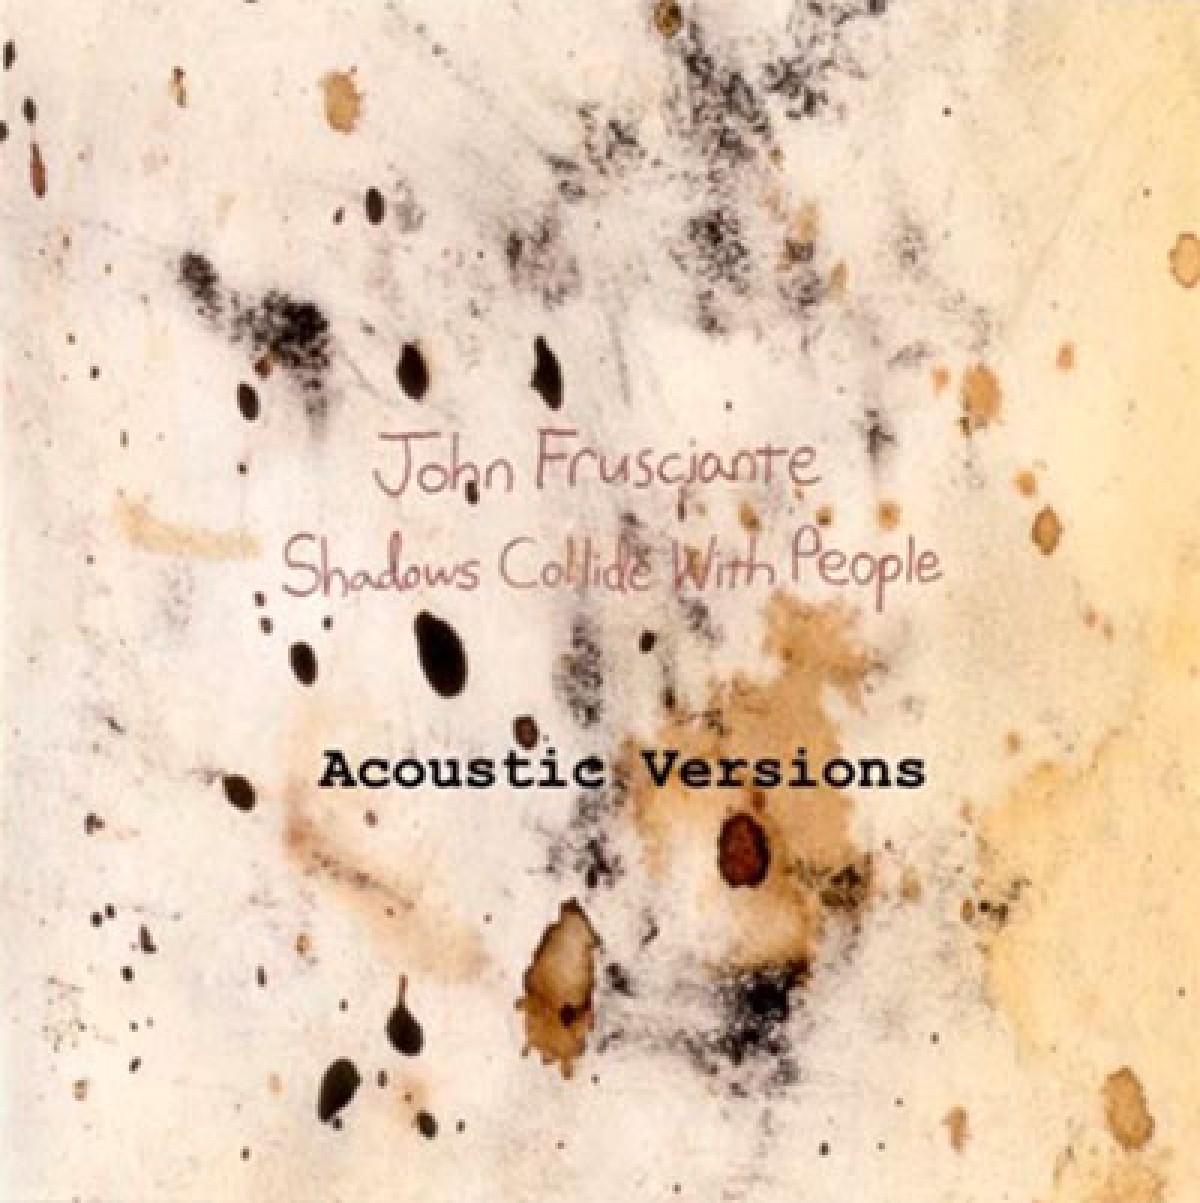 Shadows Collide With People - Acoustic